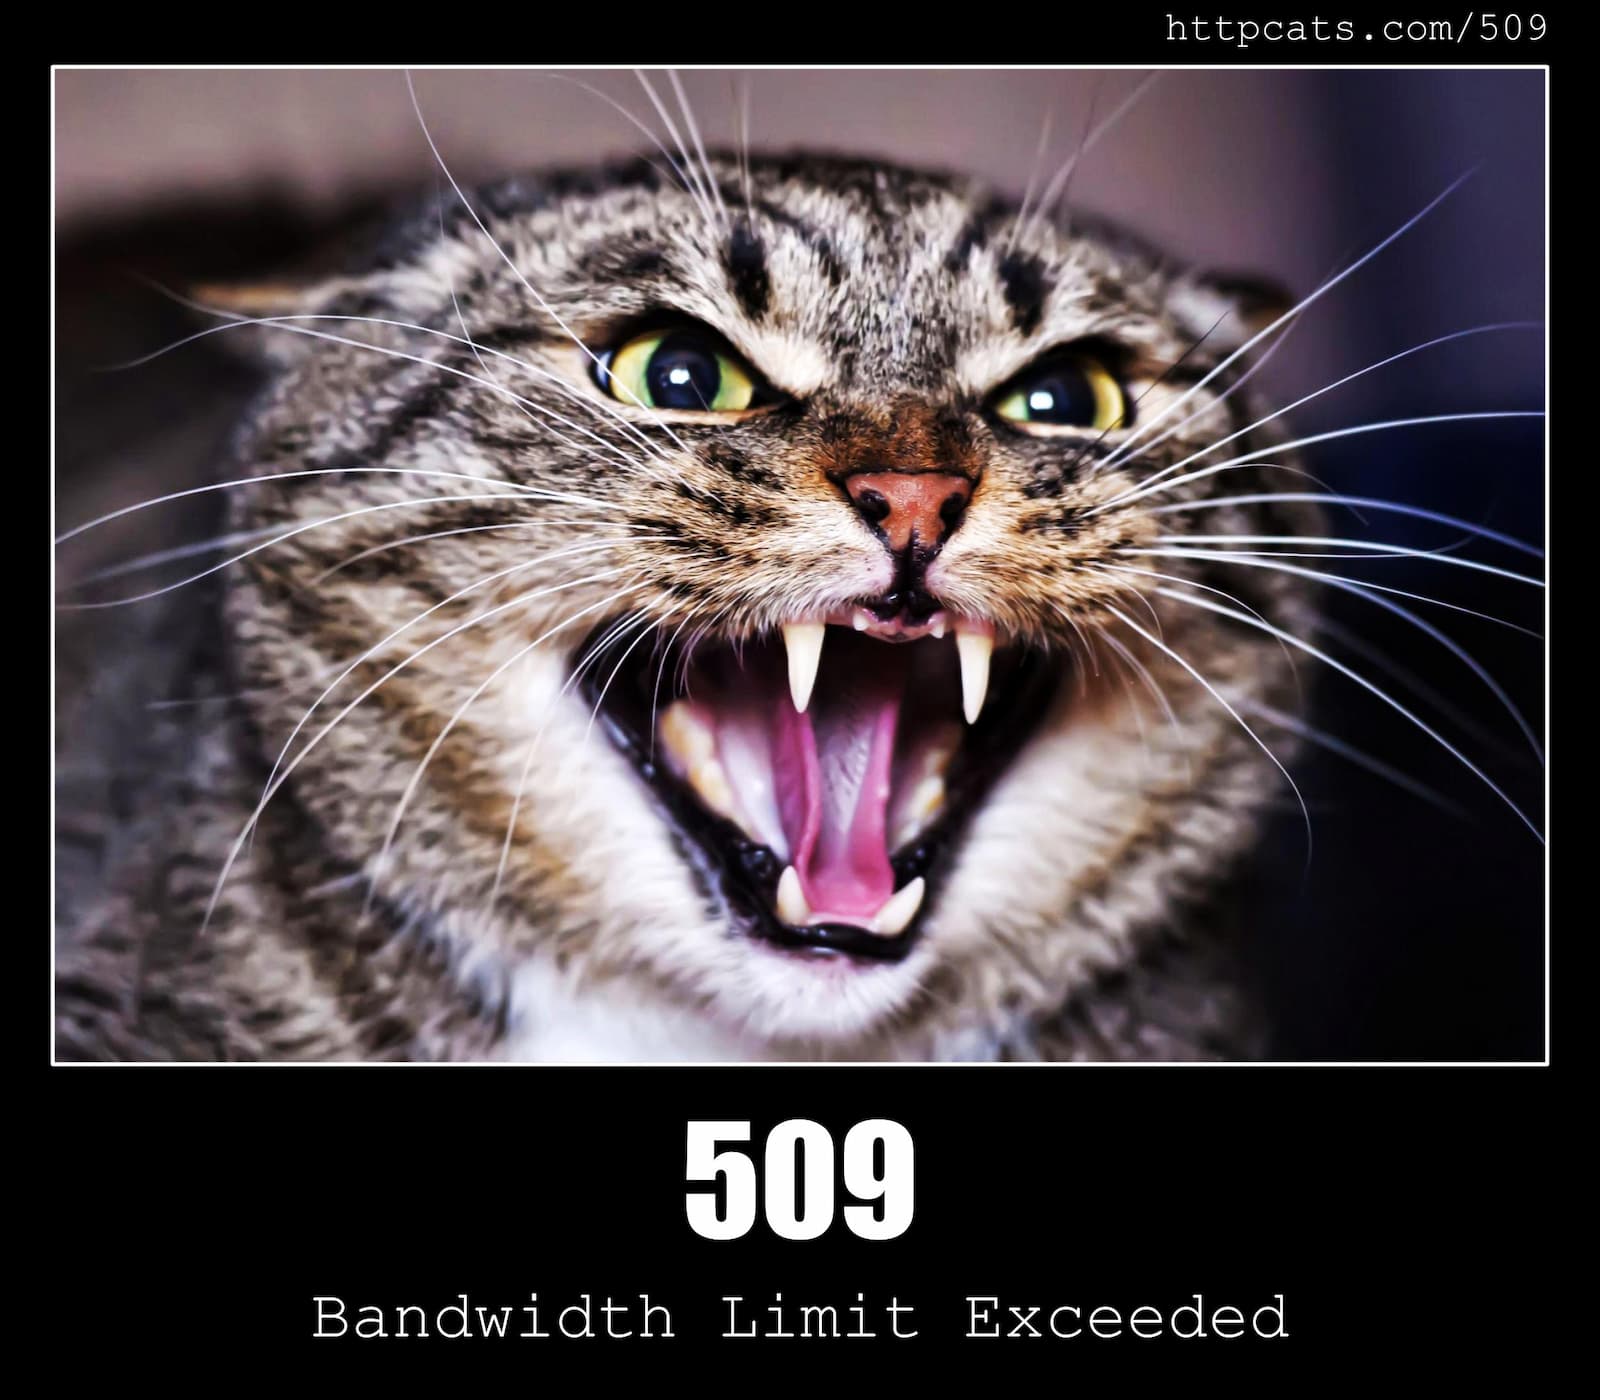 HTTP Status Code 509 Bandwidth Limit Exceeded & Cats